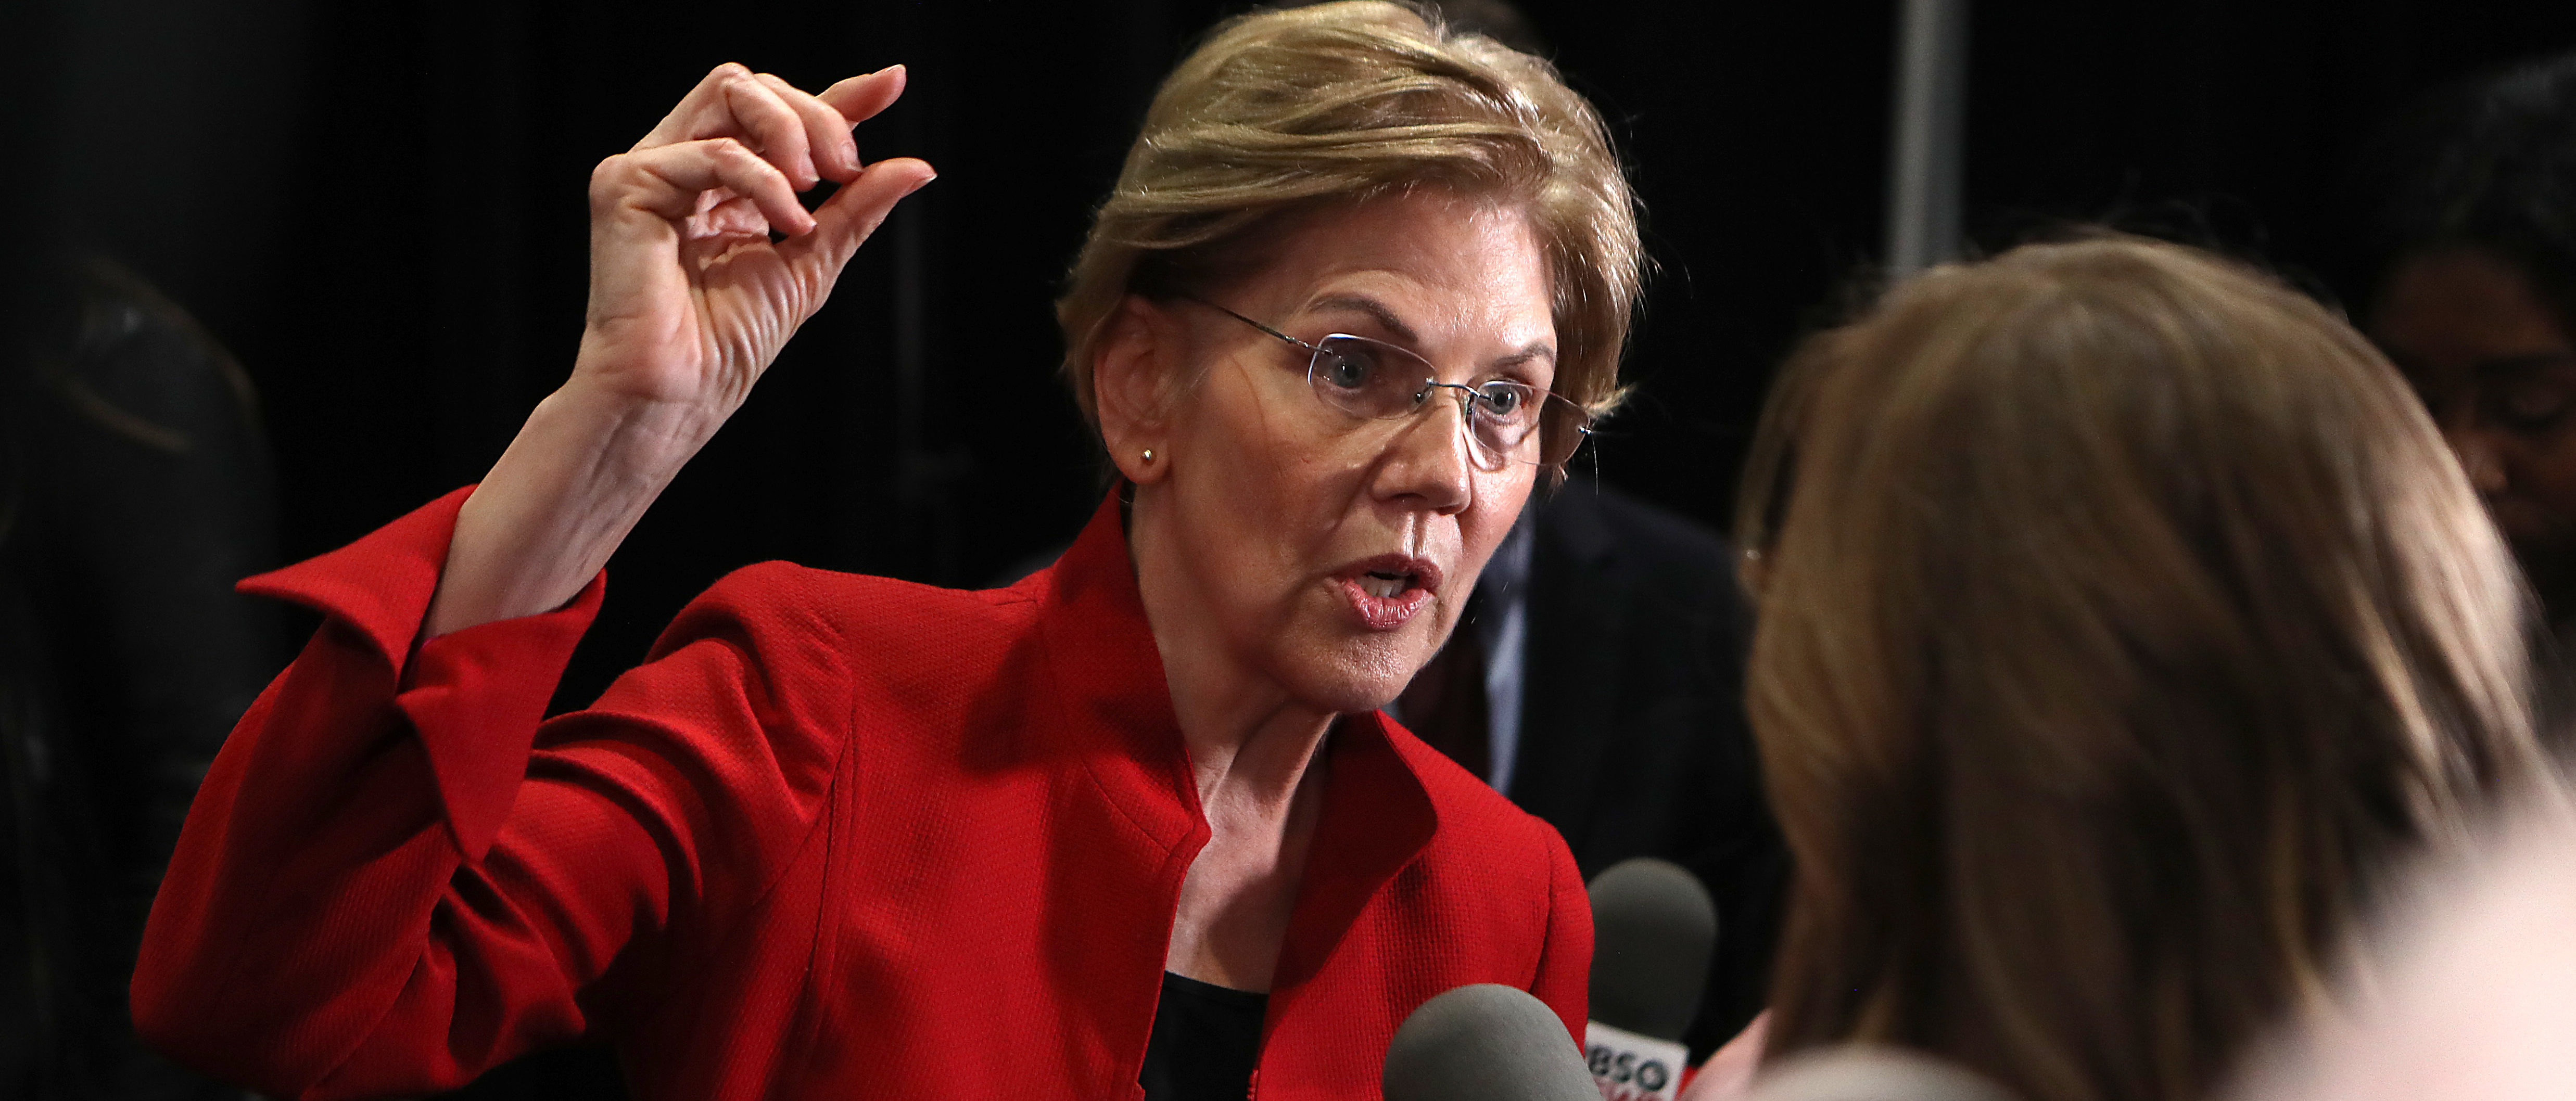 Sen. Elizabeth Warren speaks with the media after the Democratic presidential primary debate at Loyola Marymount University on Dec. 19, 2019 in Los Angeles, California. (Photo by Mario Tama/Getty Images)